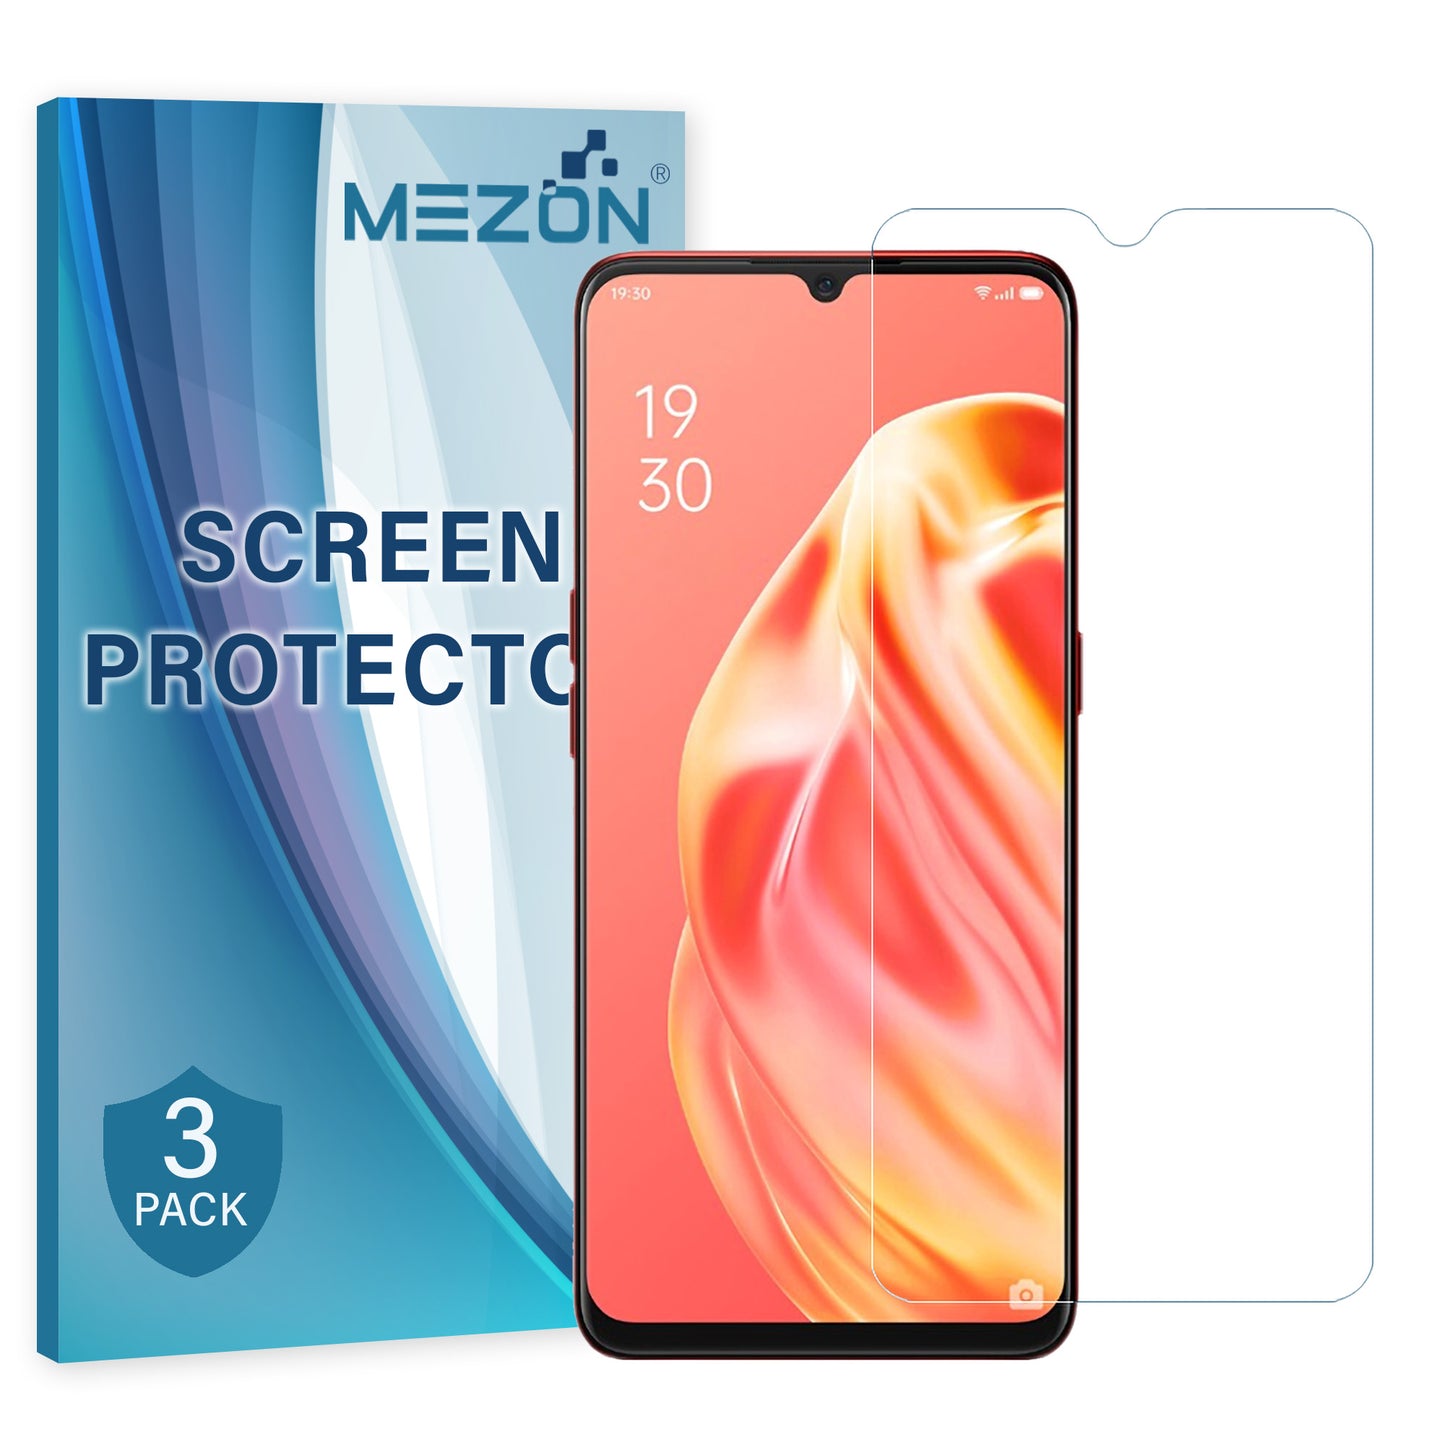 [3 Pack] MEZON Vivo Y11s Ultra Clear Screen Protector Case Friendly Film (Vivo Y11s, Clear)